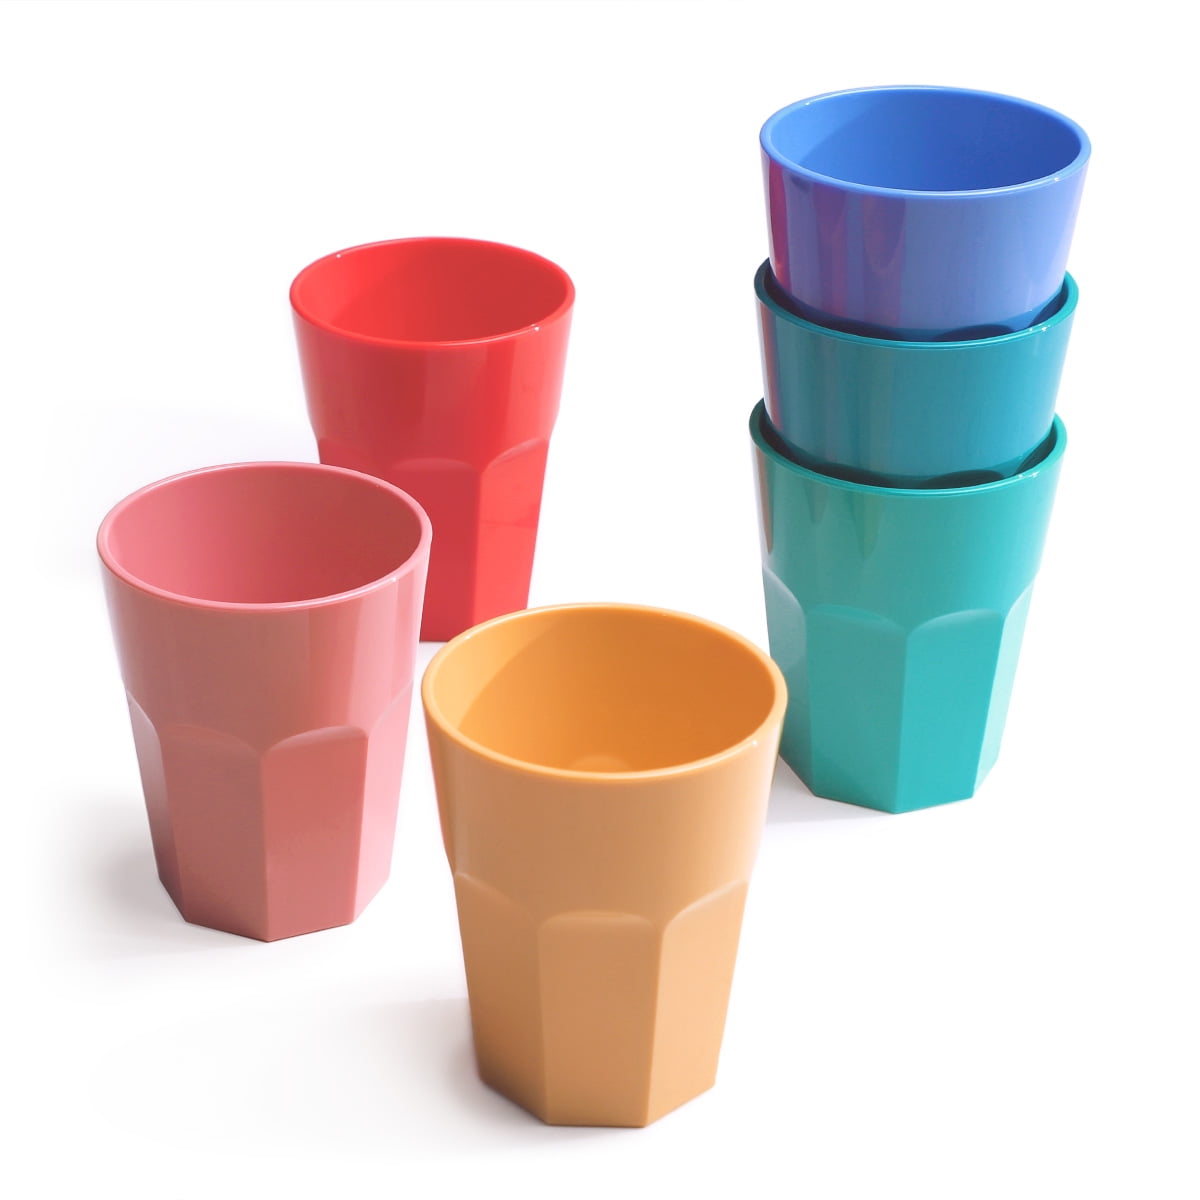 Cupture The Small Cup - Plastic Tumblers, 12 oz, 6-Pack (Assorted Colors) 